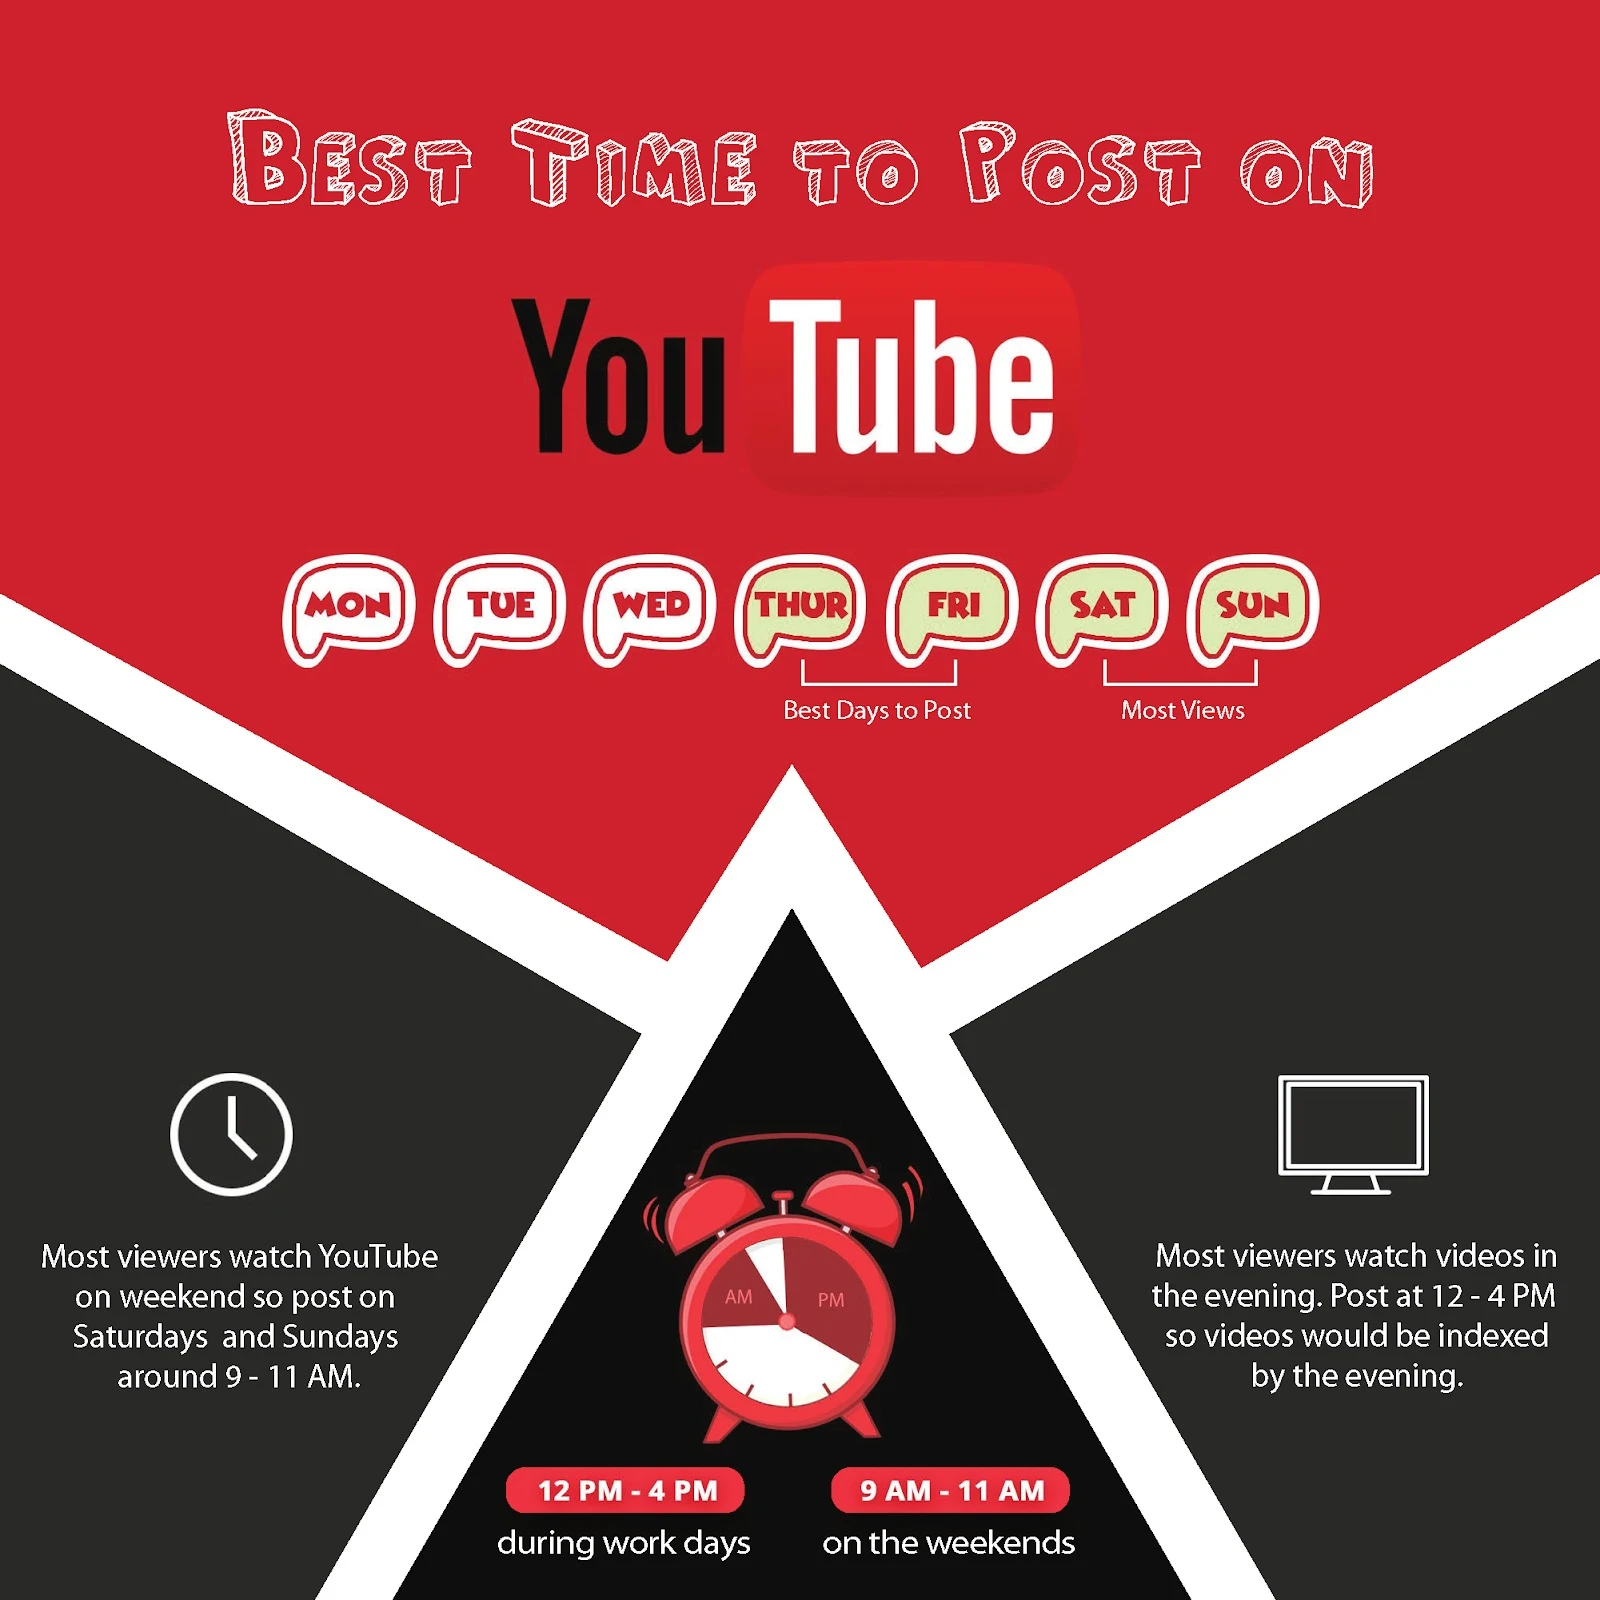 When to post on YouTube